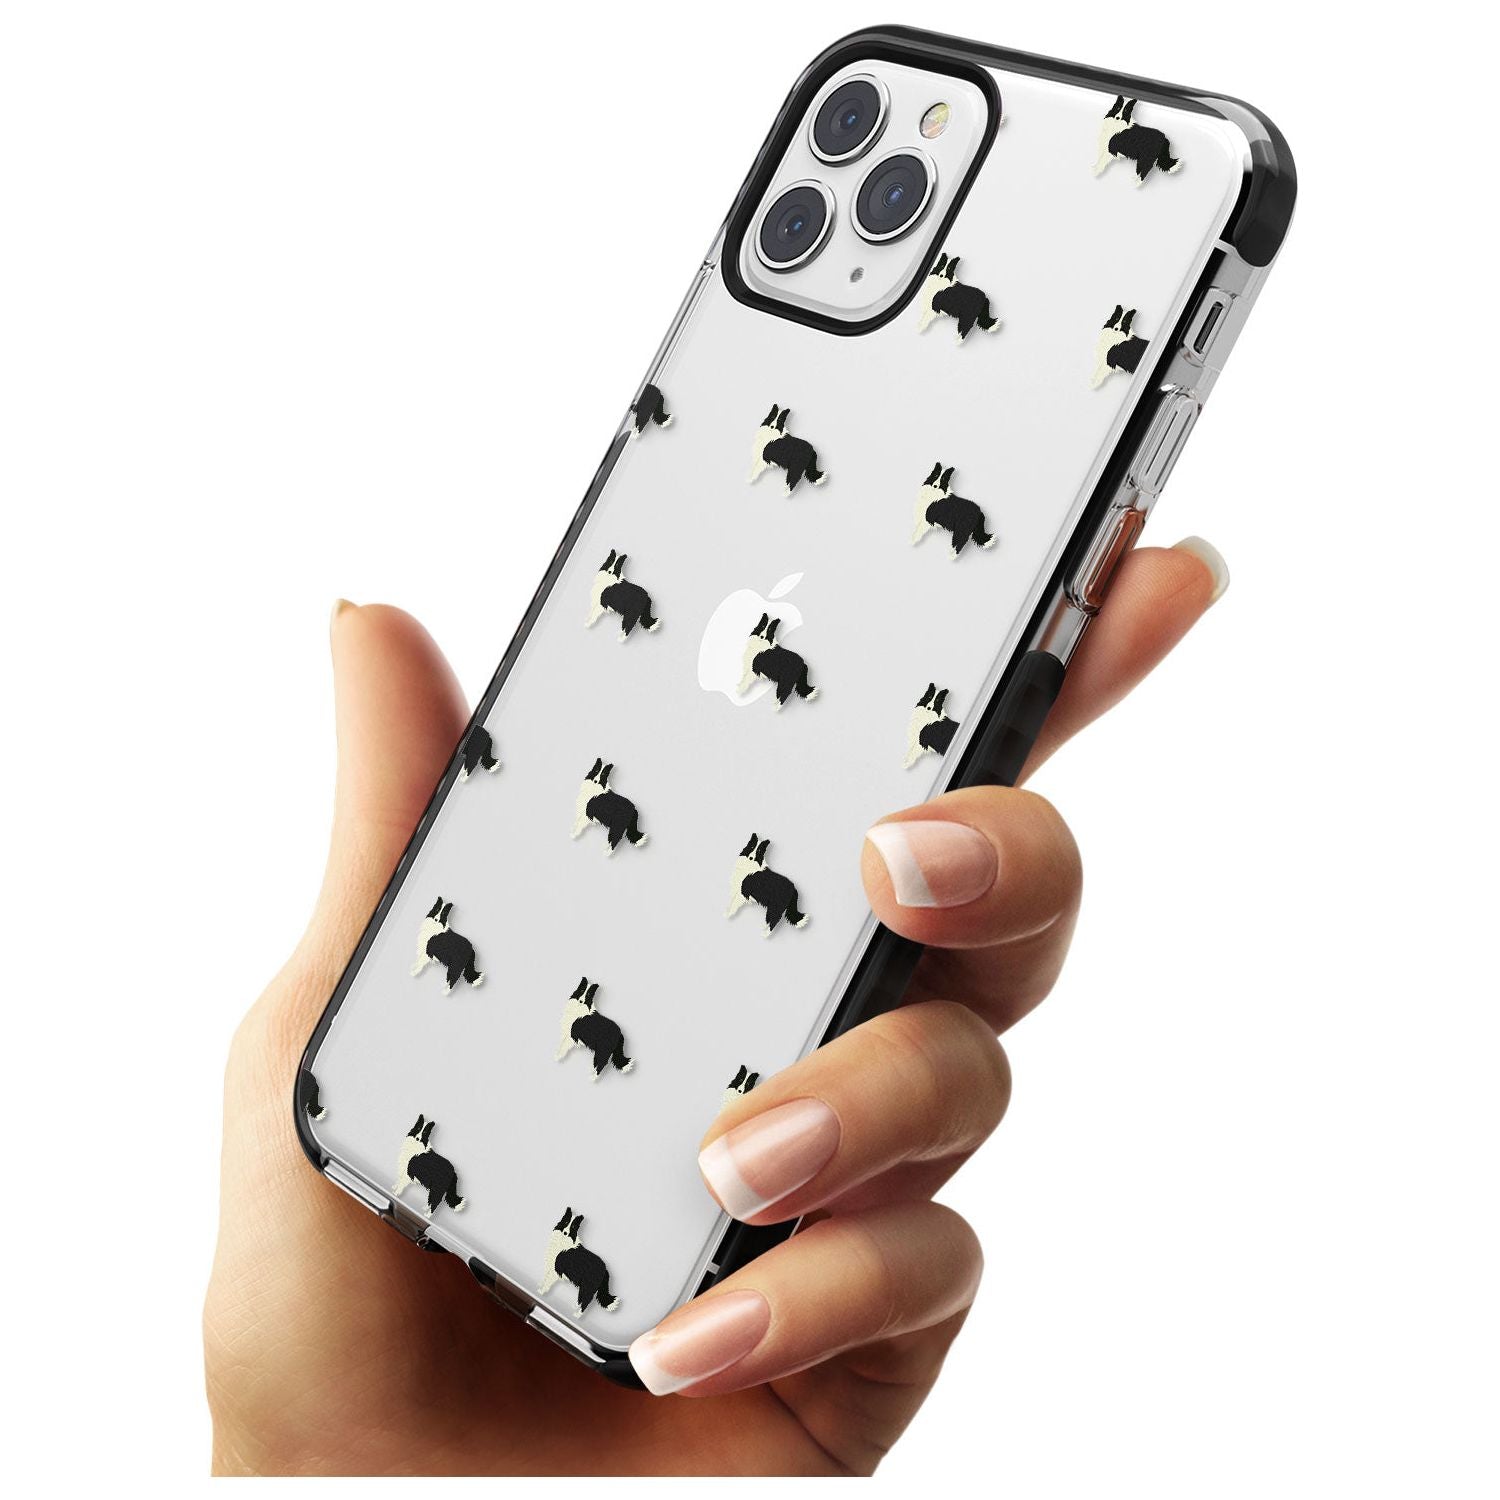 Border Collie Dog Pattern Clear Black Impact Phone Case for iPhone 11 Pro Max